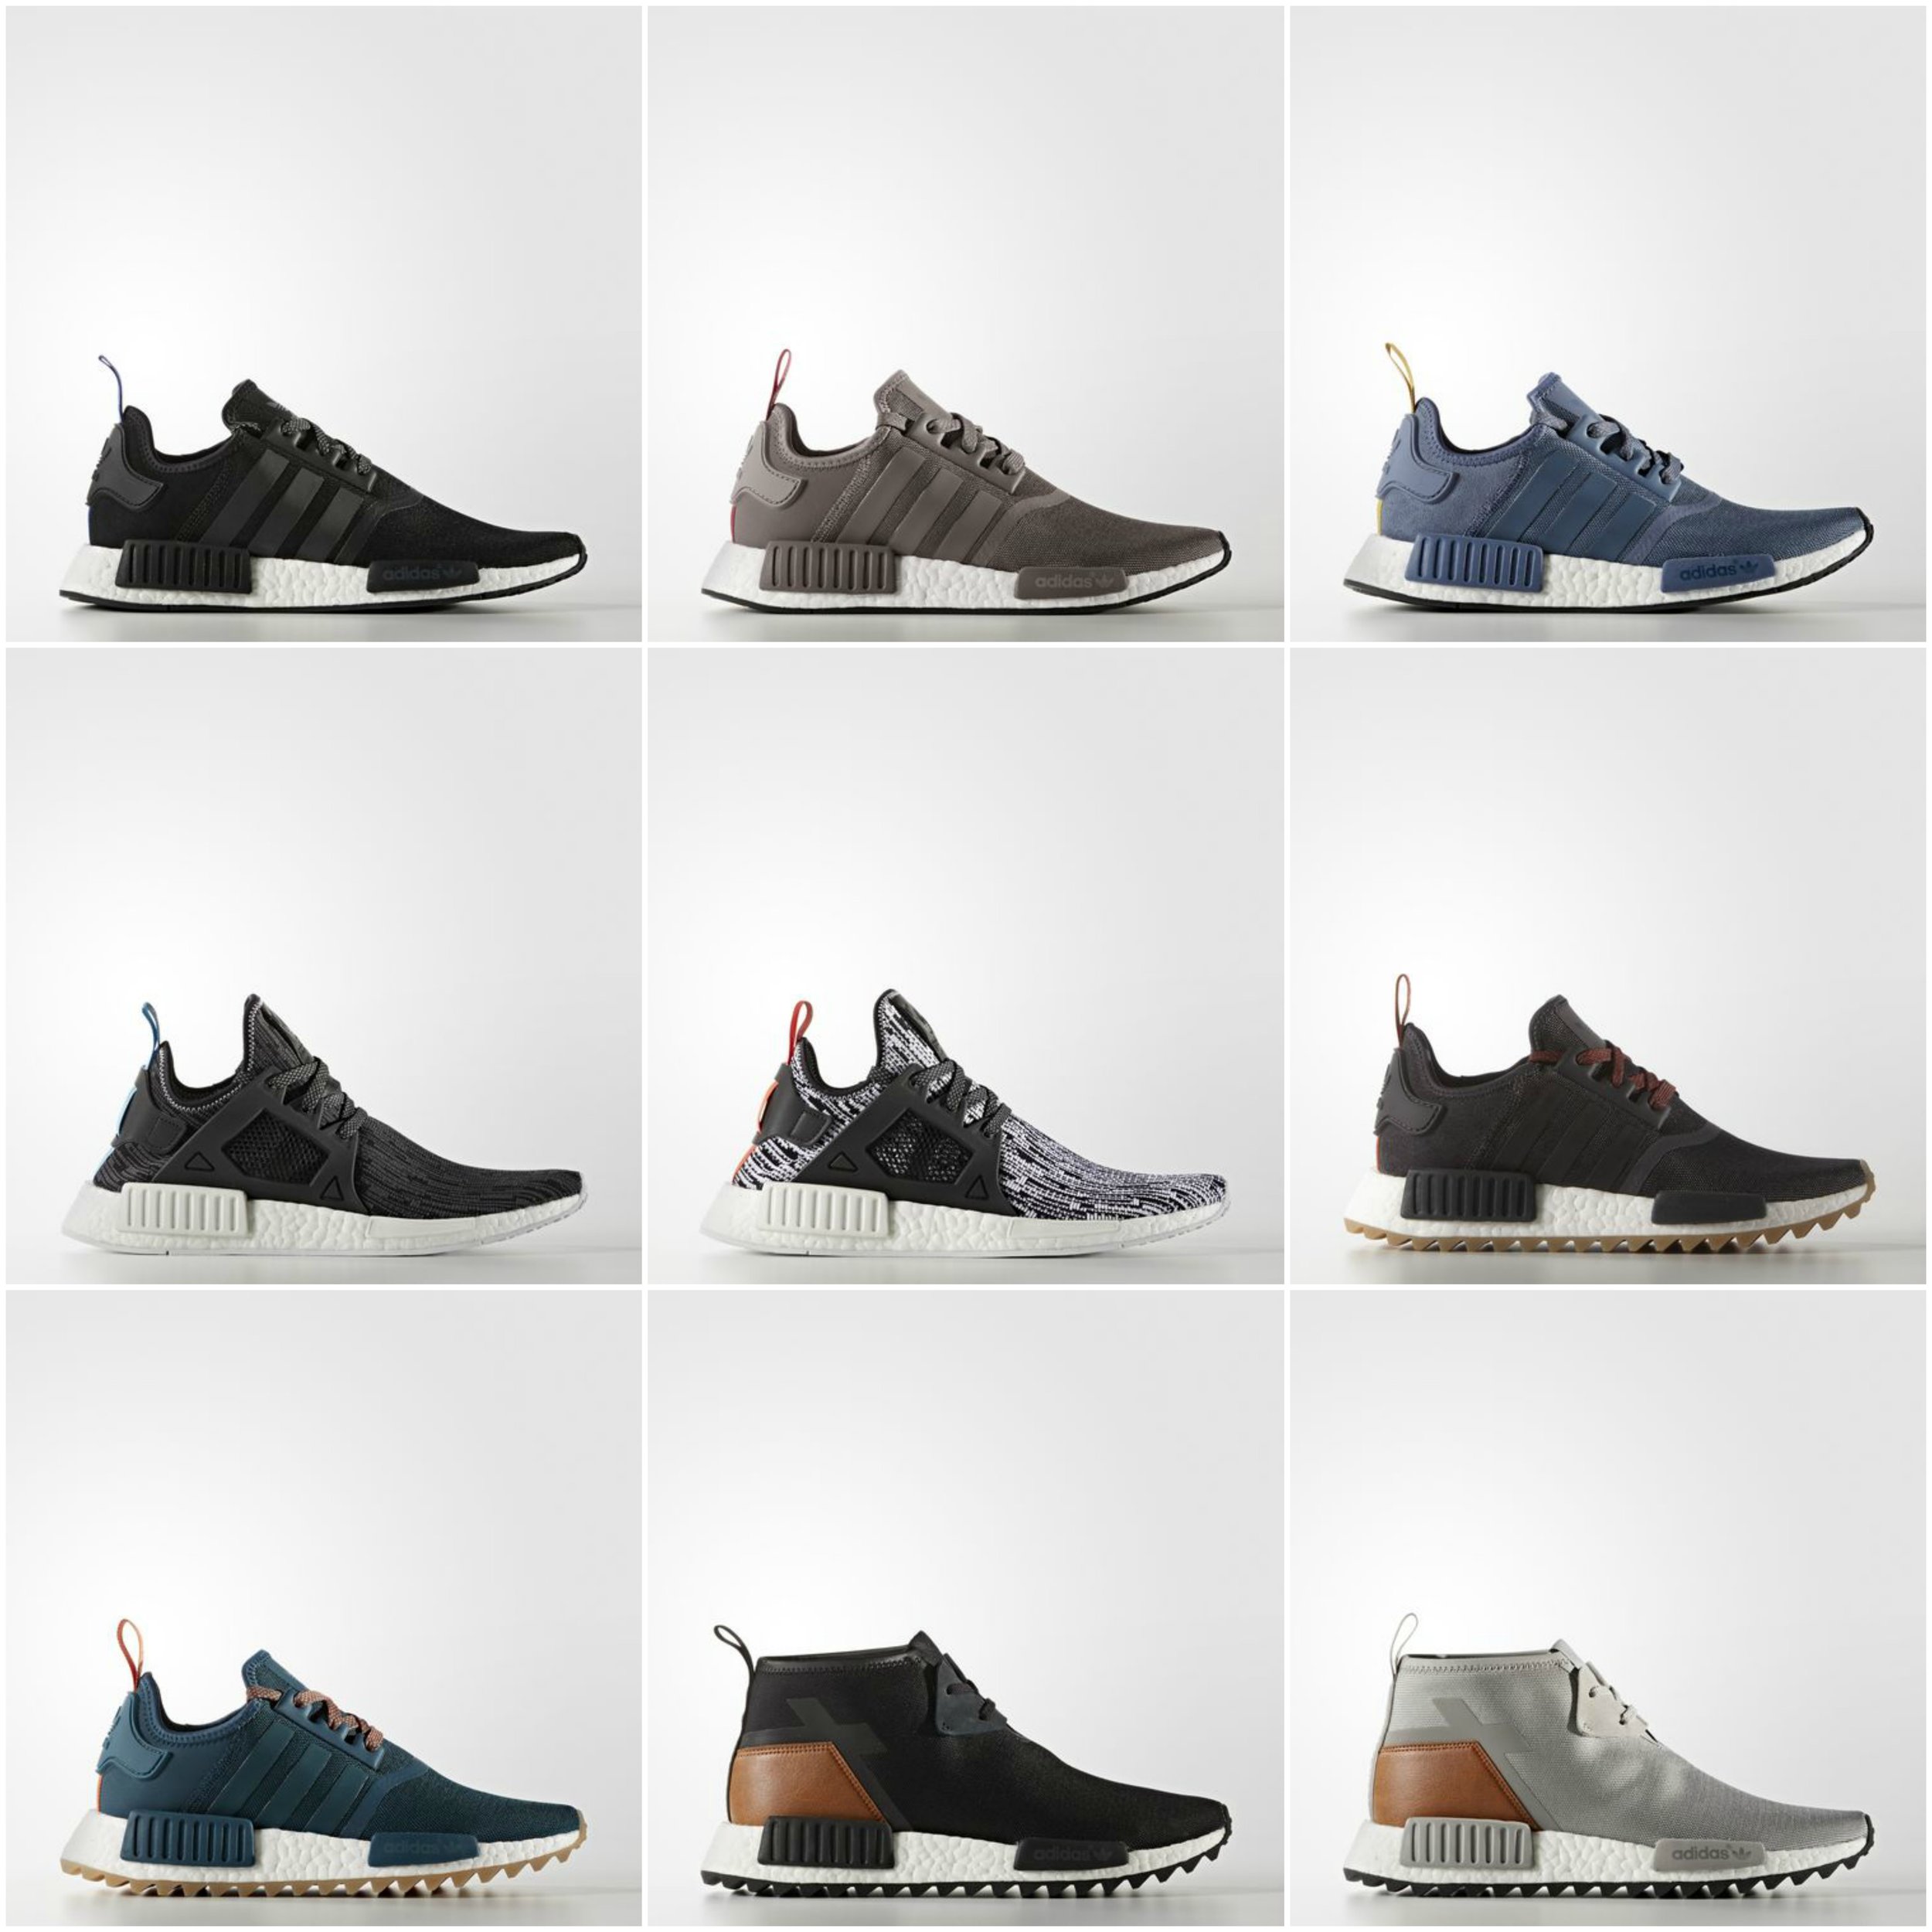 all nmd colorways -